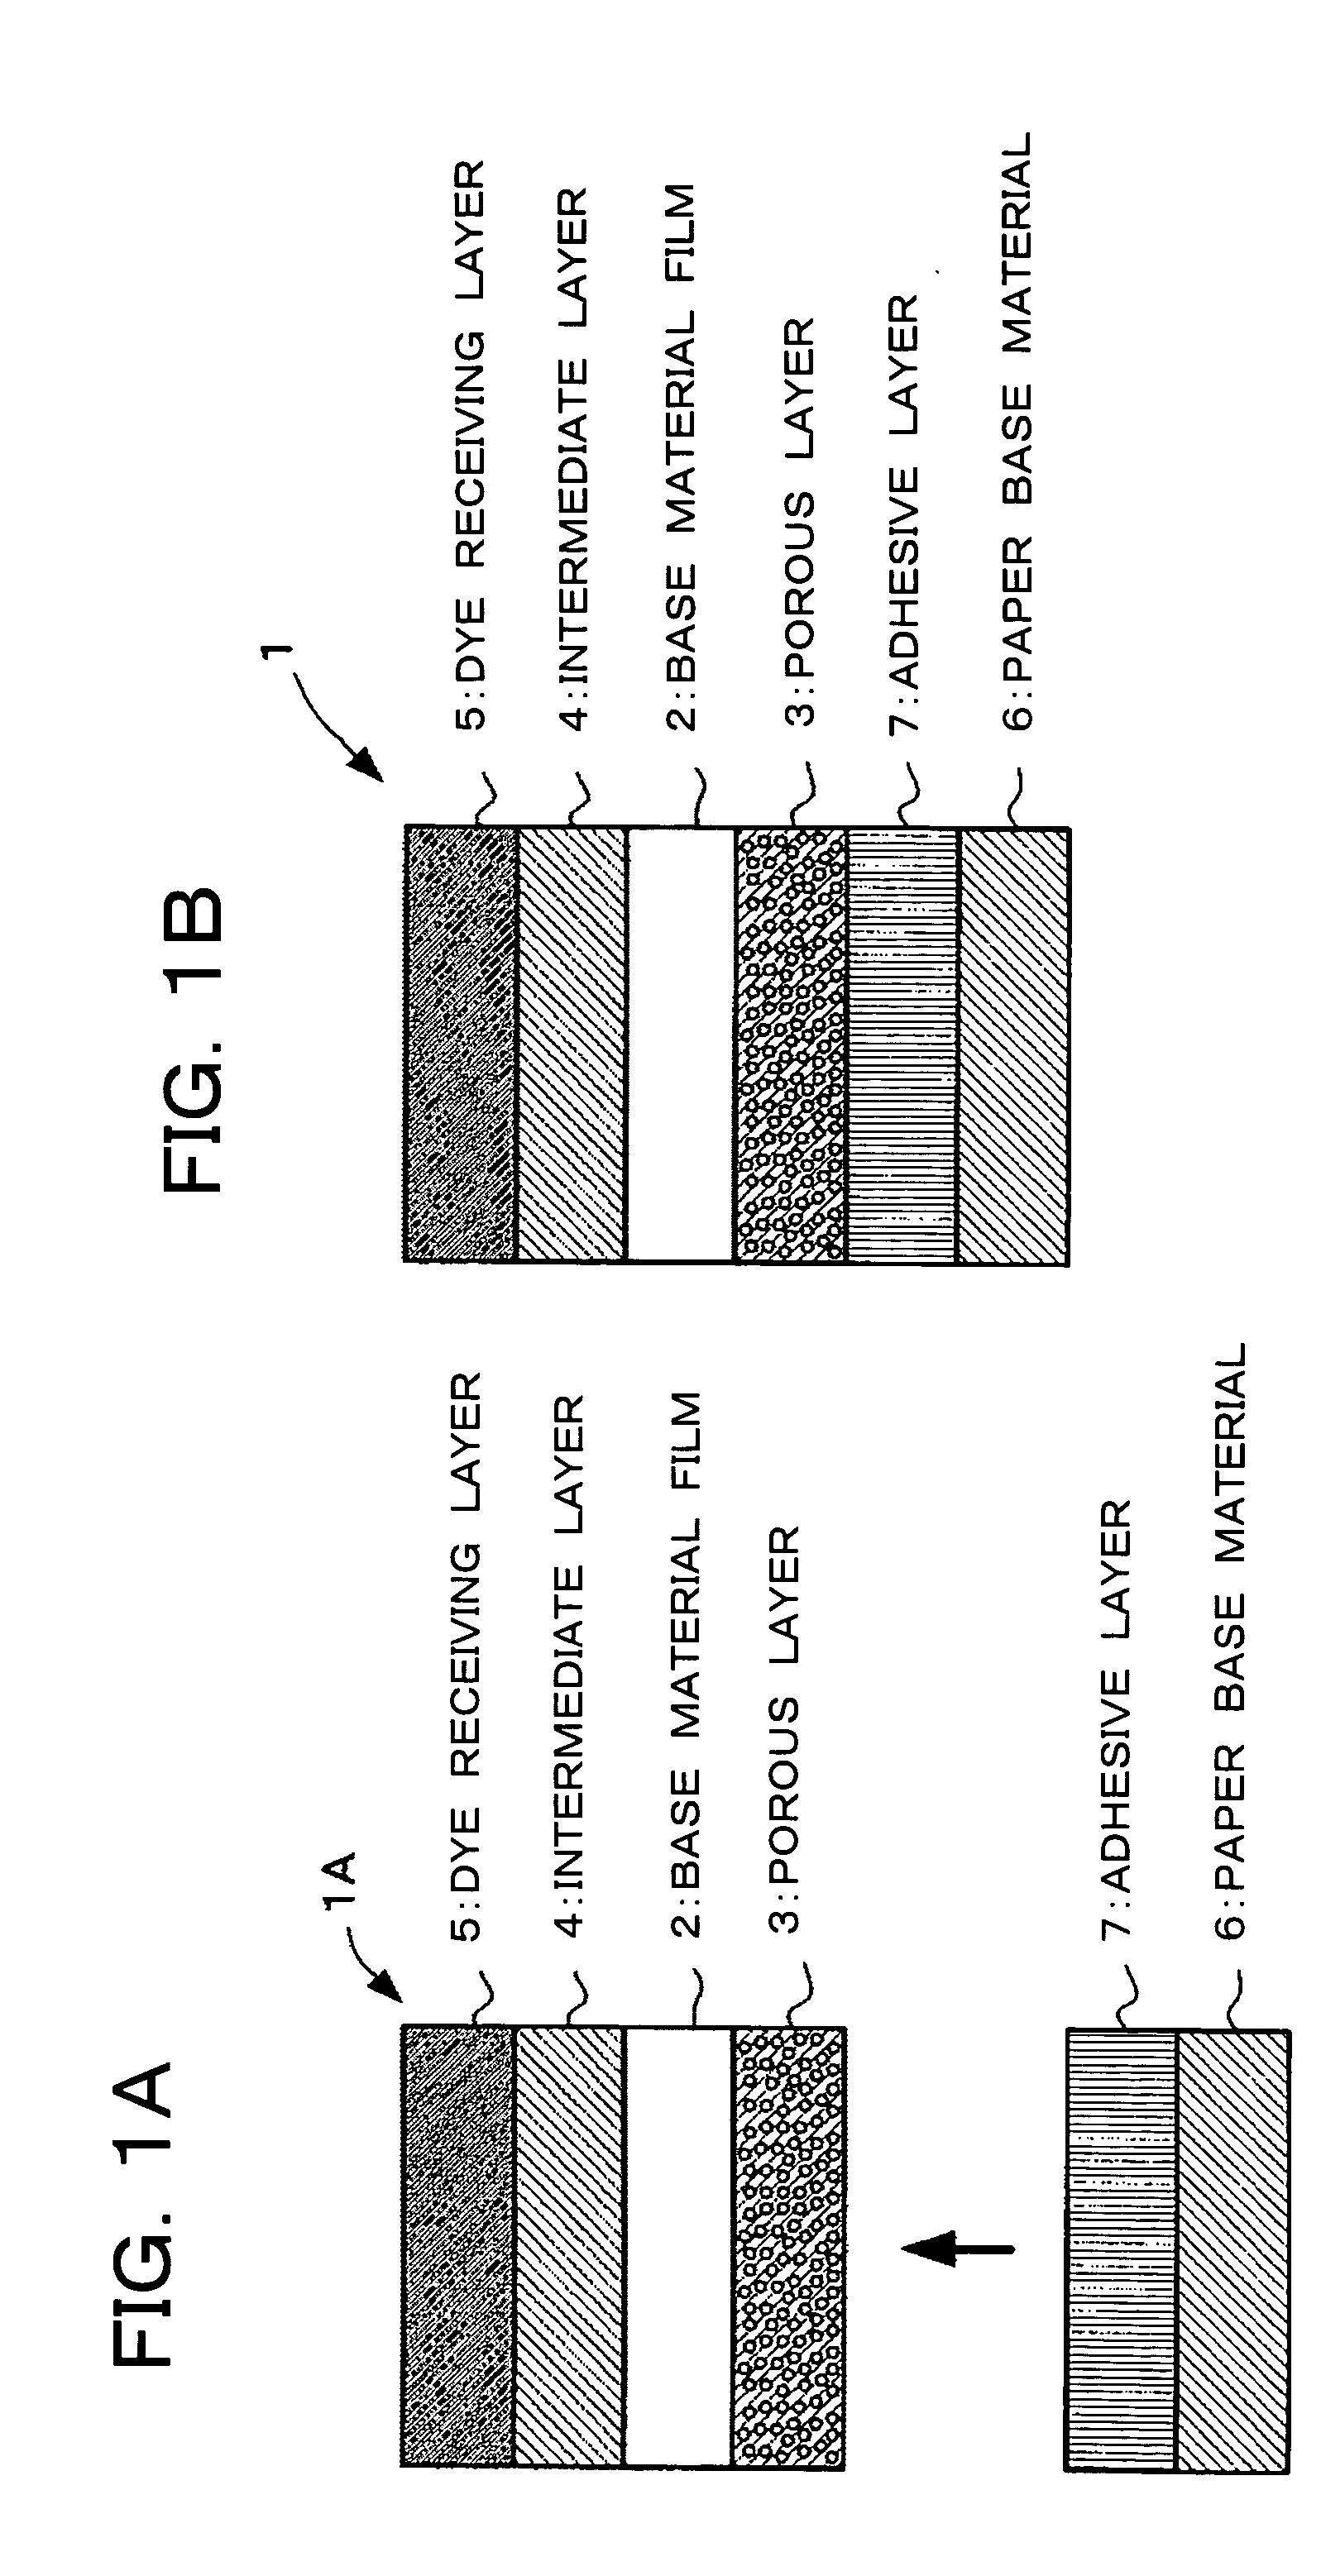 Thermal transfer image receiving sheet and method for manufacturing the same